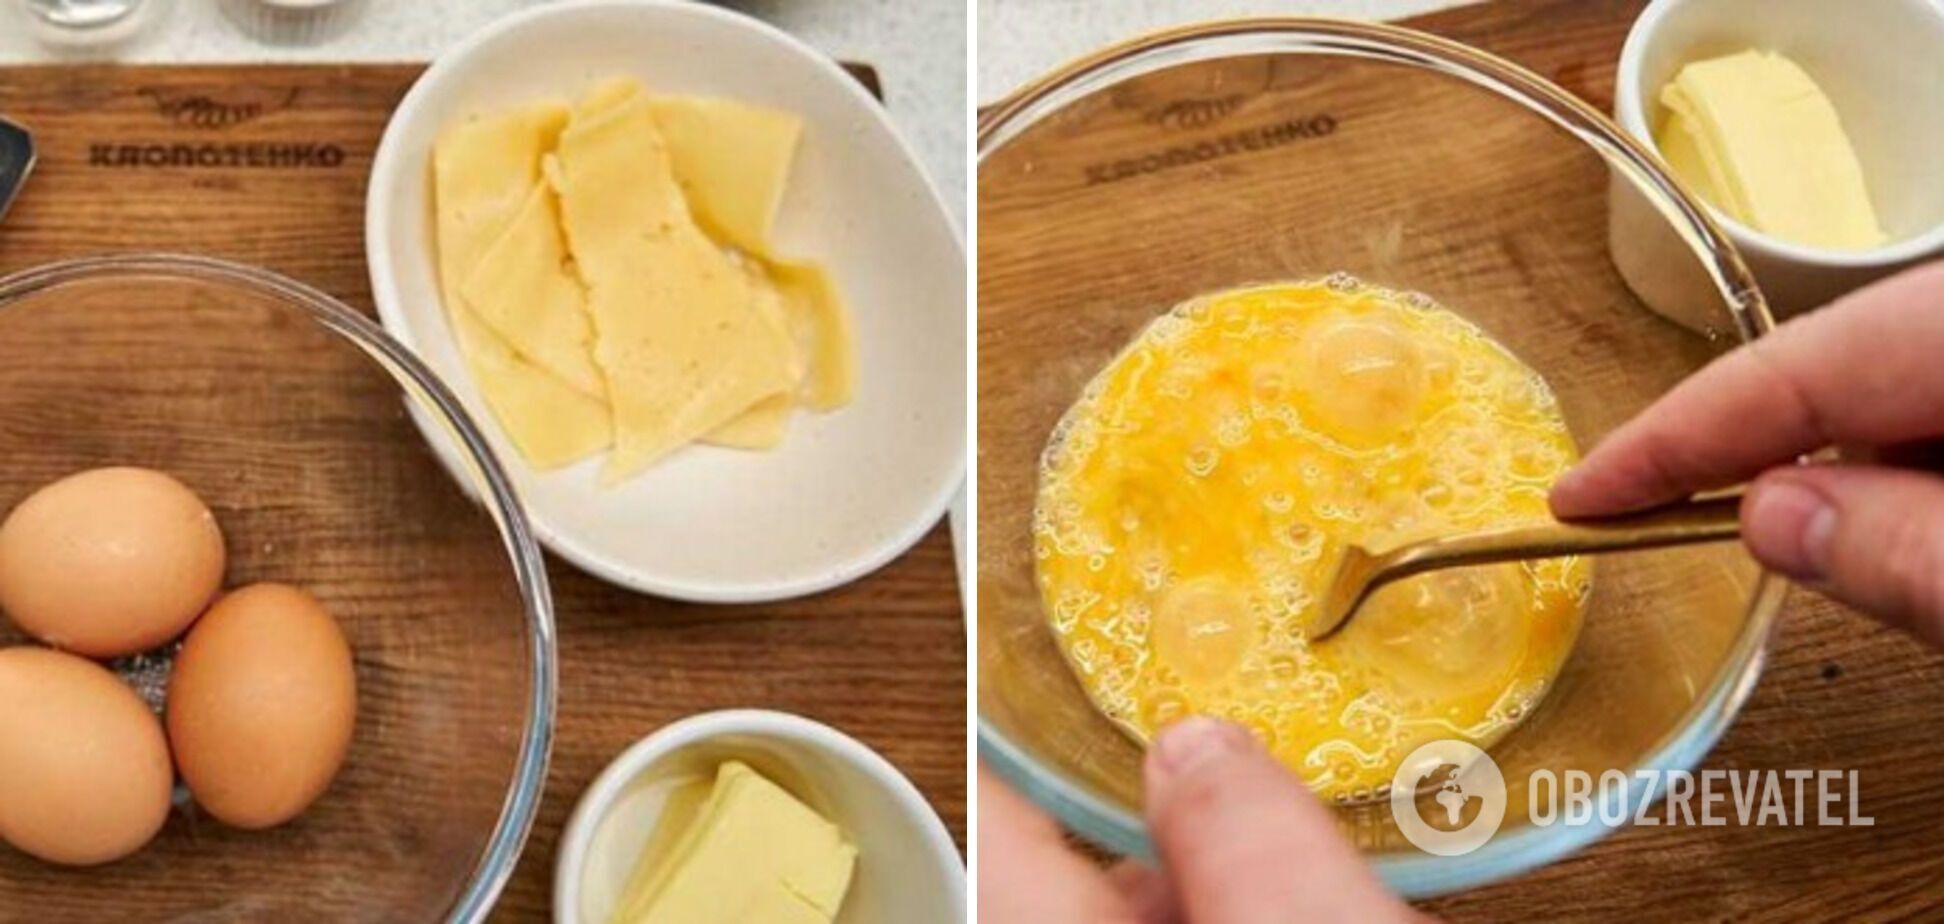 How to make a real omelet